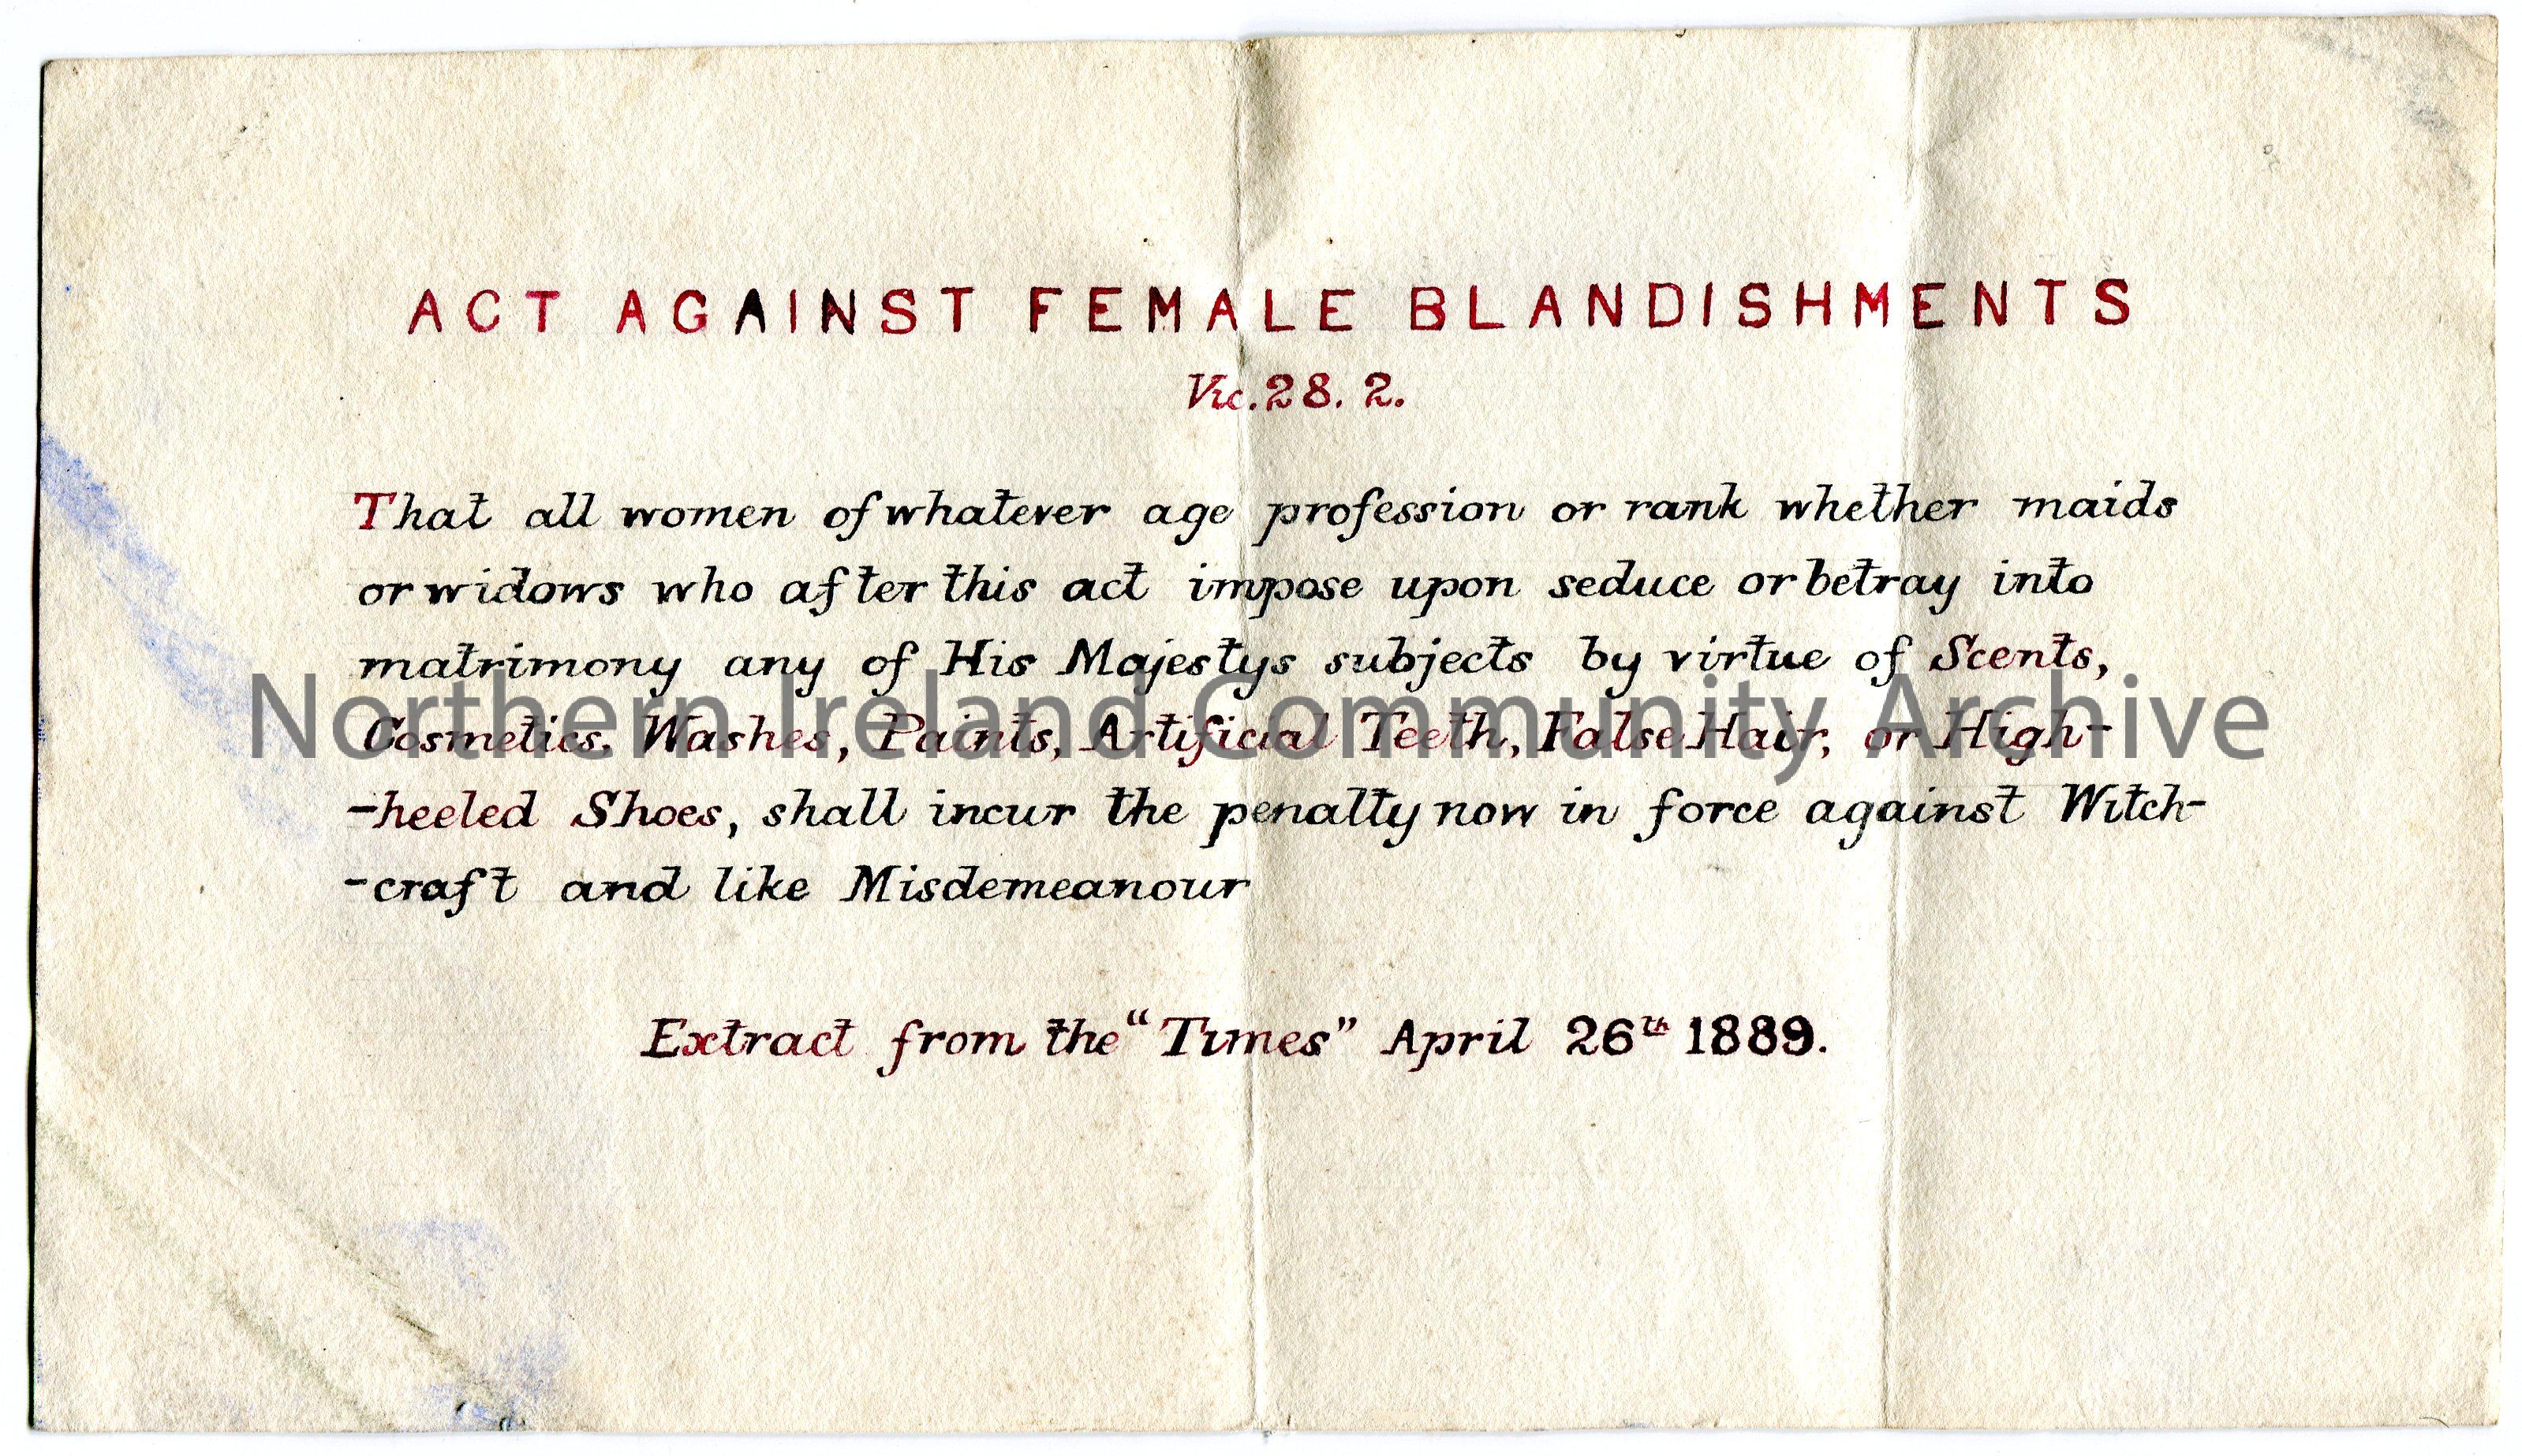 Handwritten extract from the ‘Times’ dated 26th April 1889. Titled, ‘Act Against Female Blandishments’. Prohibiting all women from marriage by seducti…